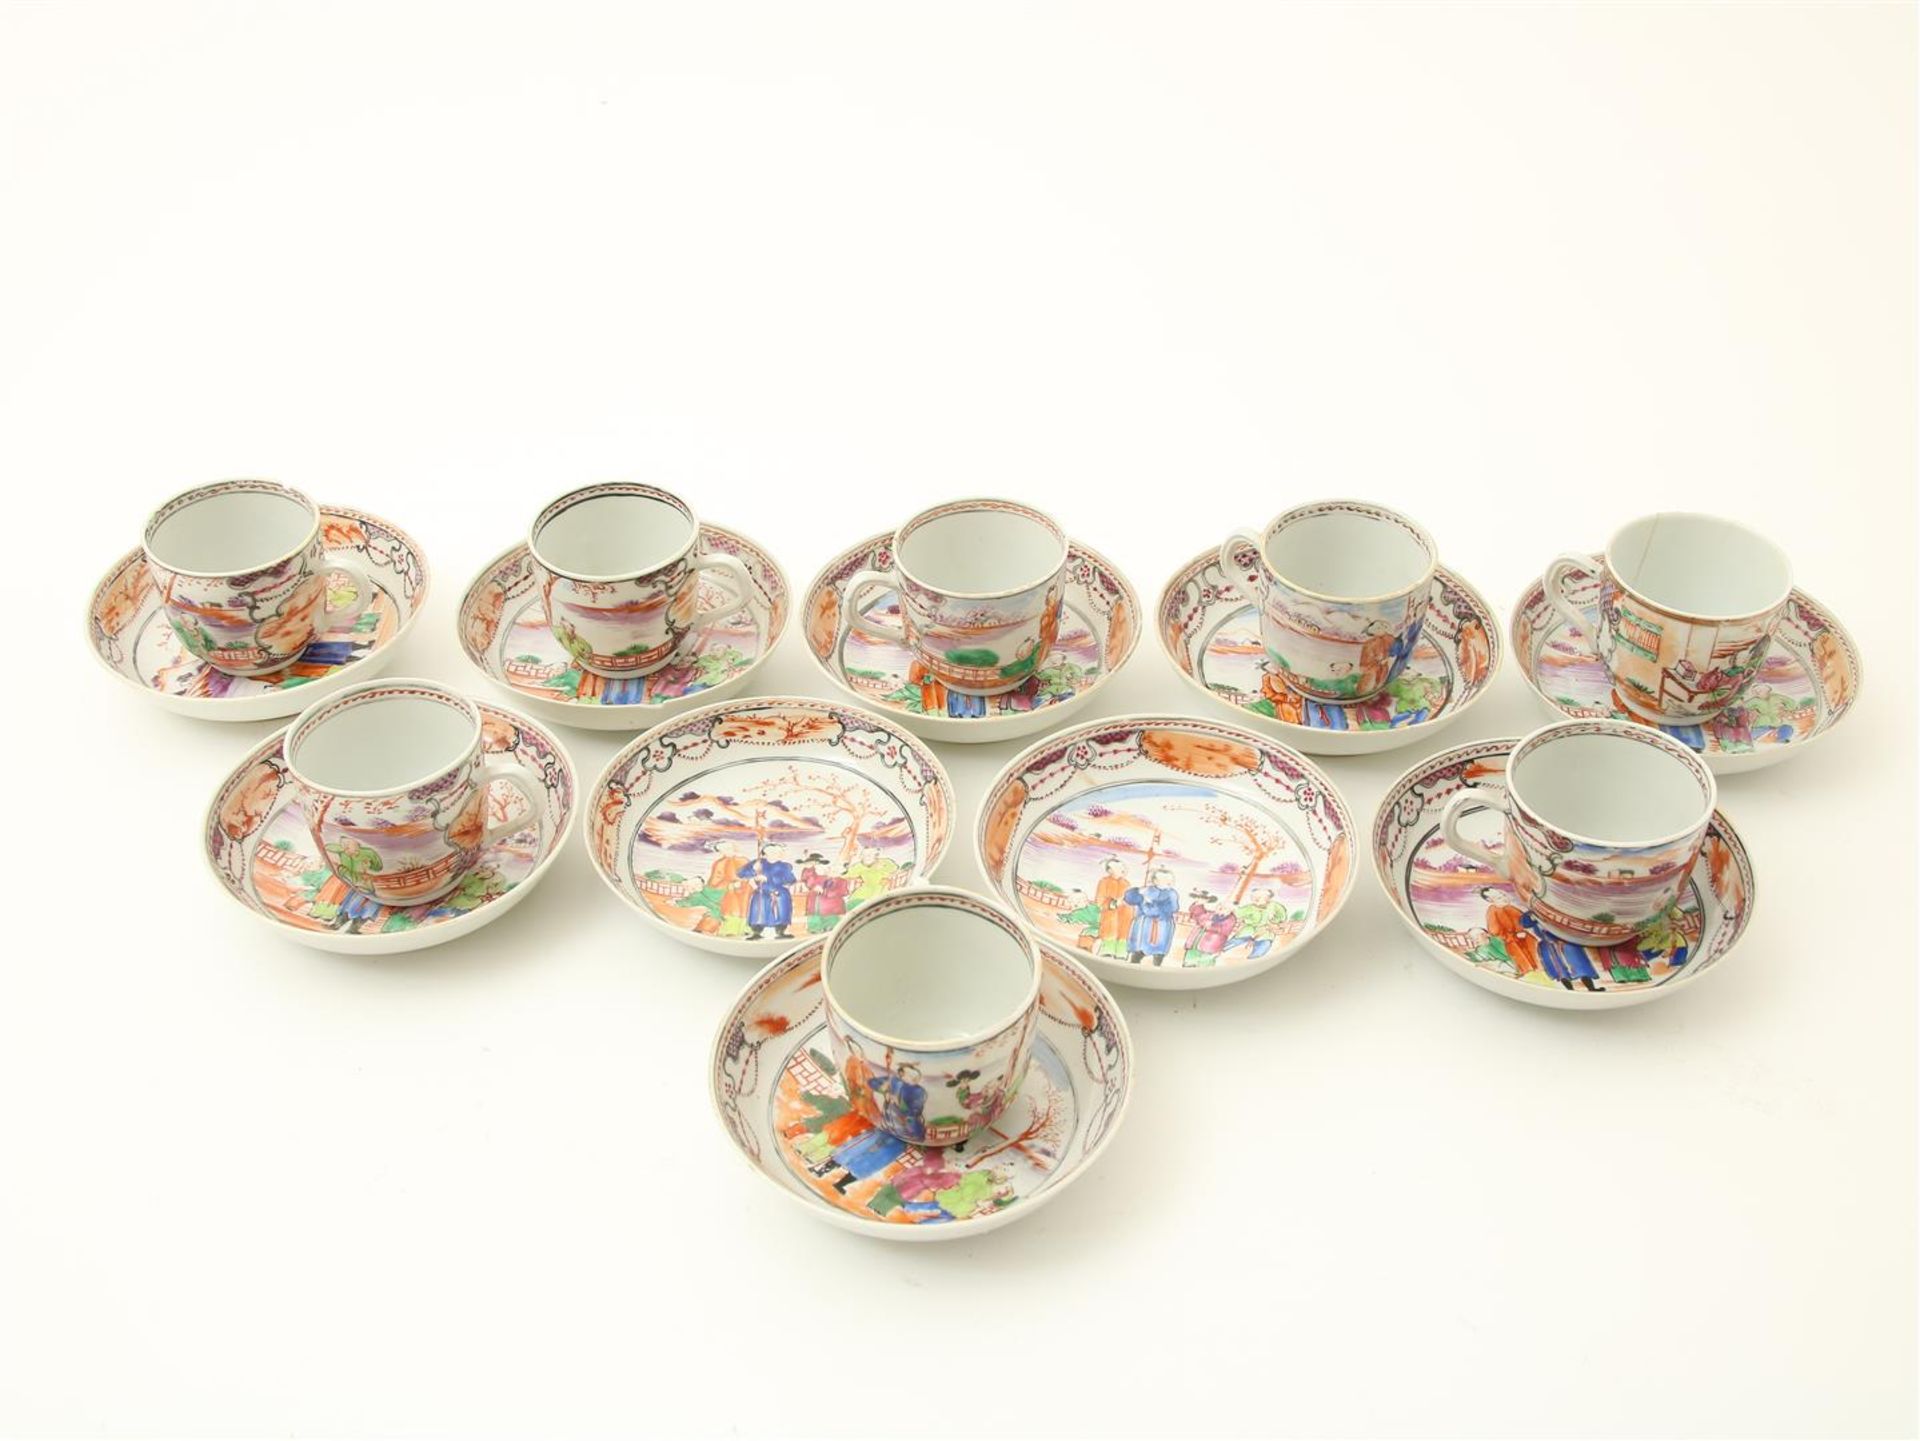 Series of 8 porcelain cups and 10 saucers, China 18th century 